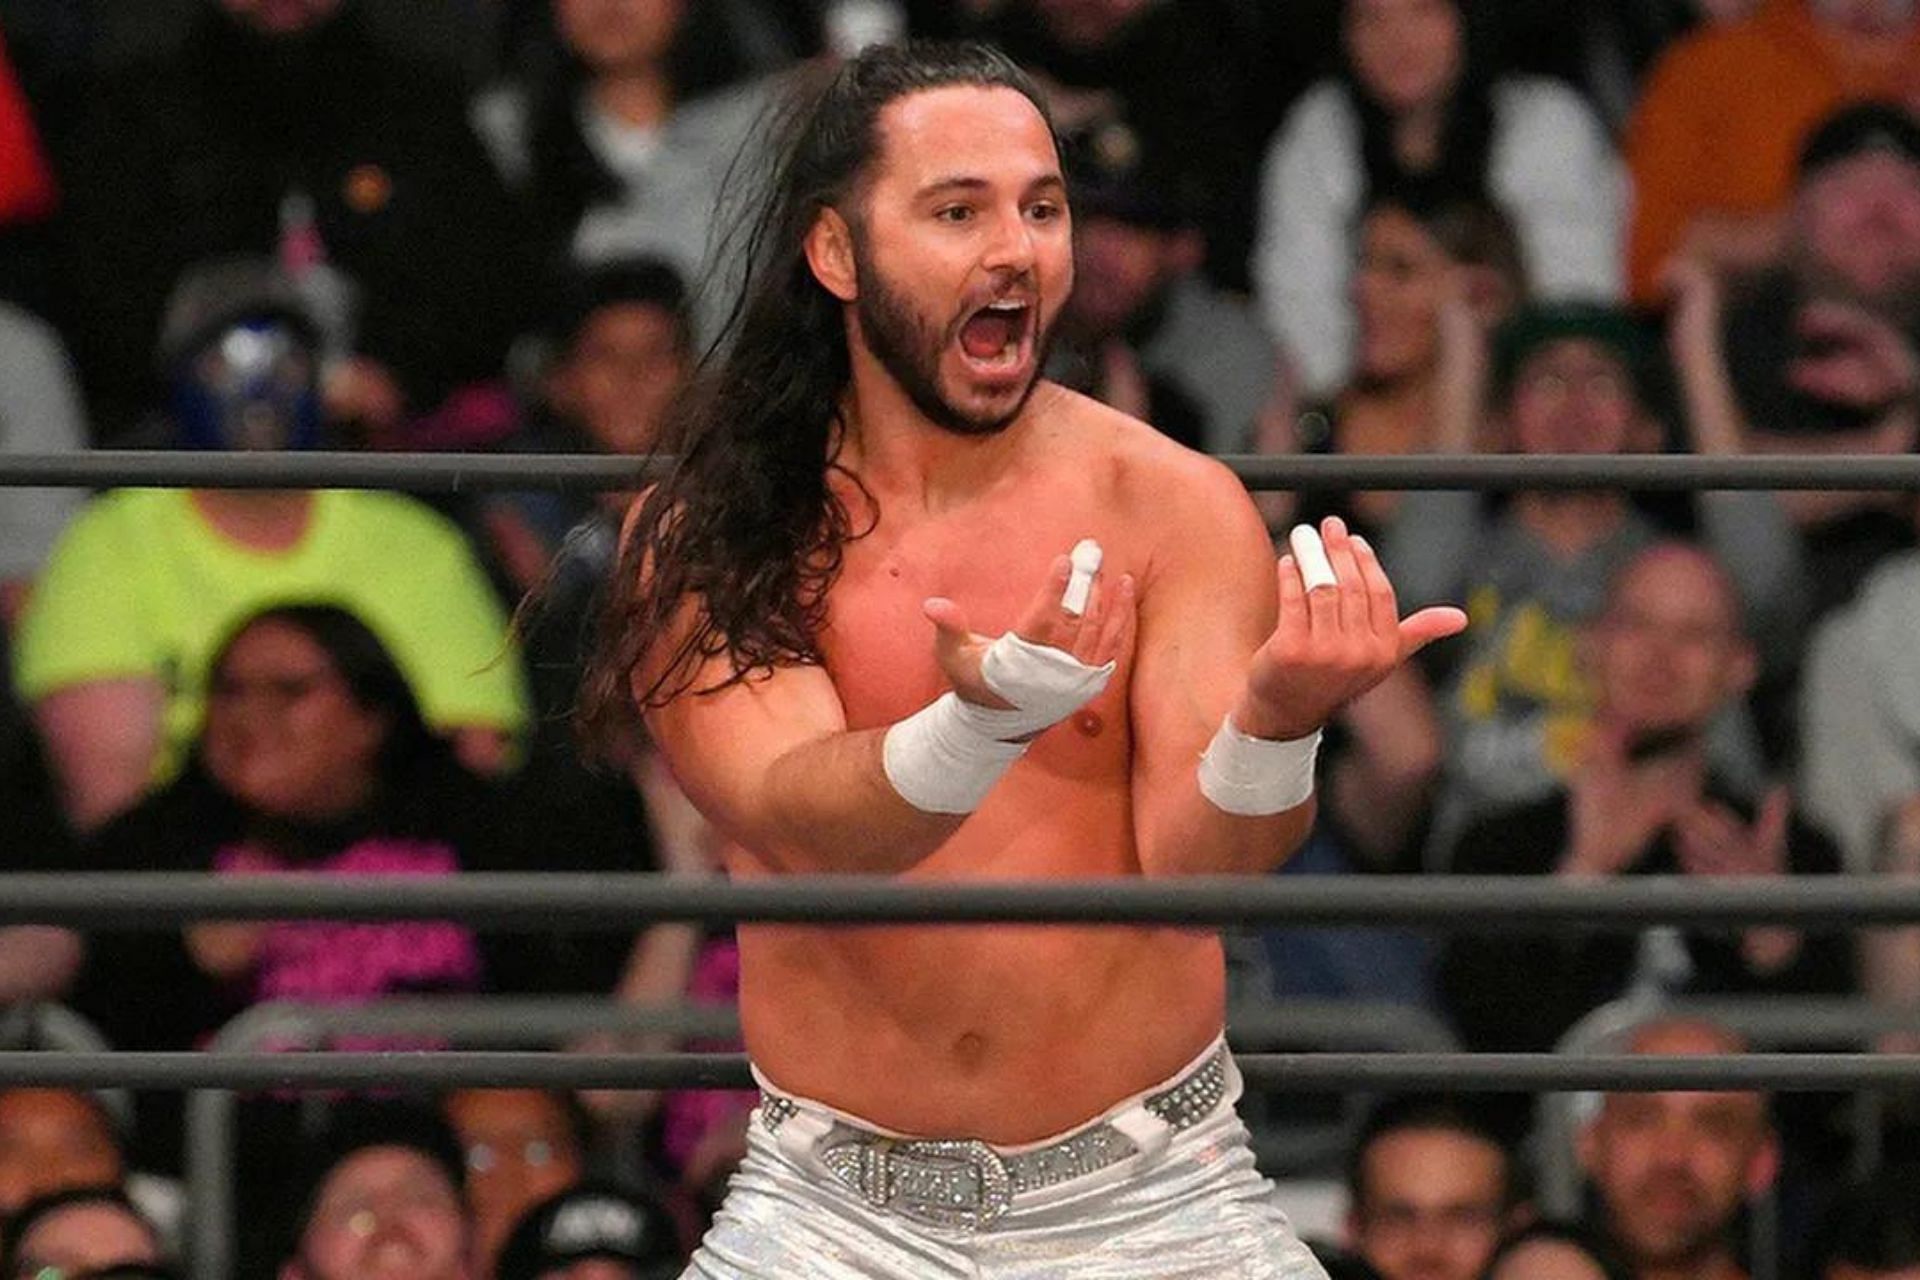 Matt Jackson is one of the Executive Vice Presidents of AEW